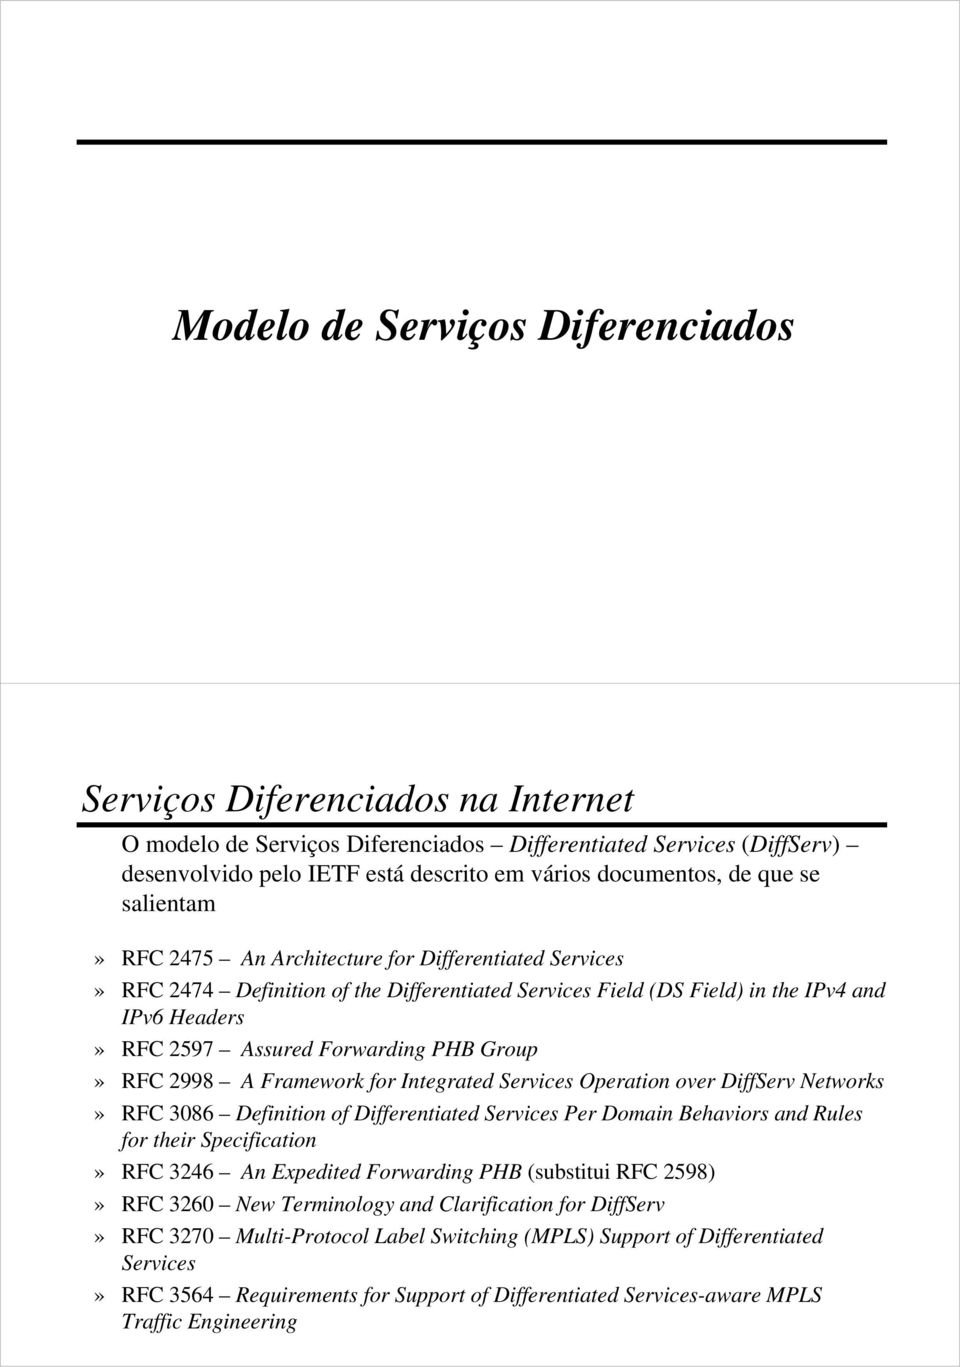 PHB Group» RFC 2998 A Framework for Integrated Services Operation over DiffServ Networks» RFC 3086 Definition of Differentiated Services Per Domain Behaviors and Rules for their Specification» RFC